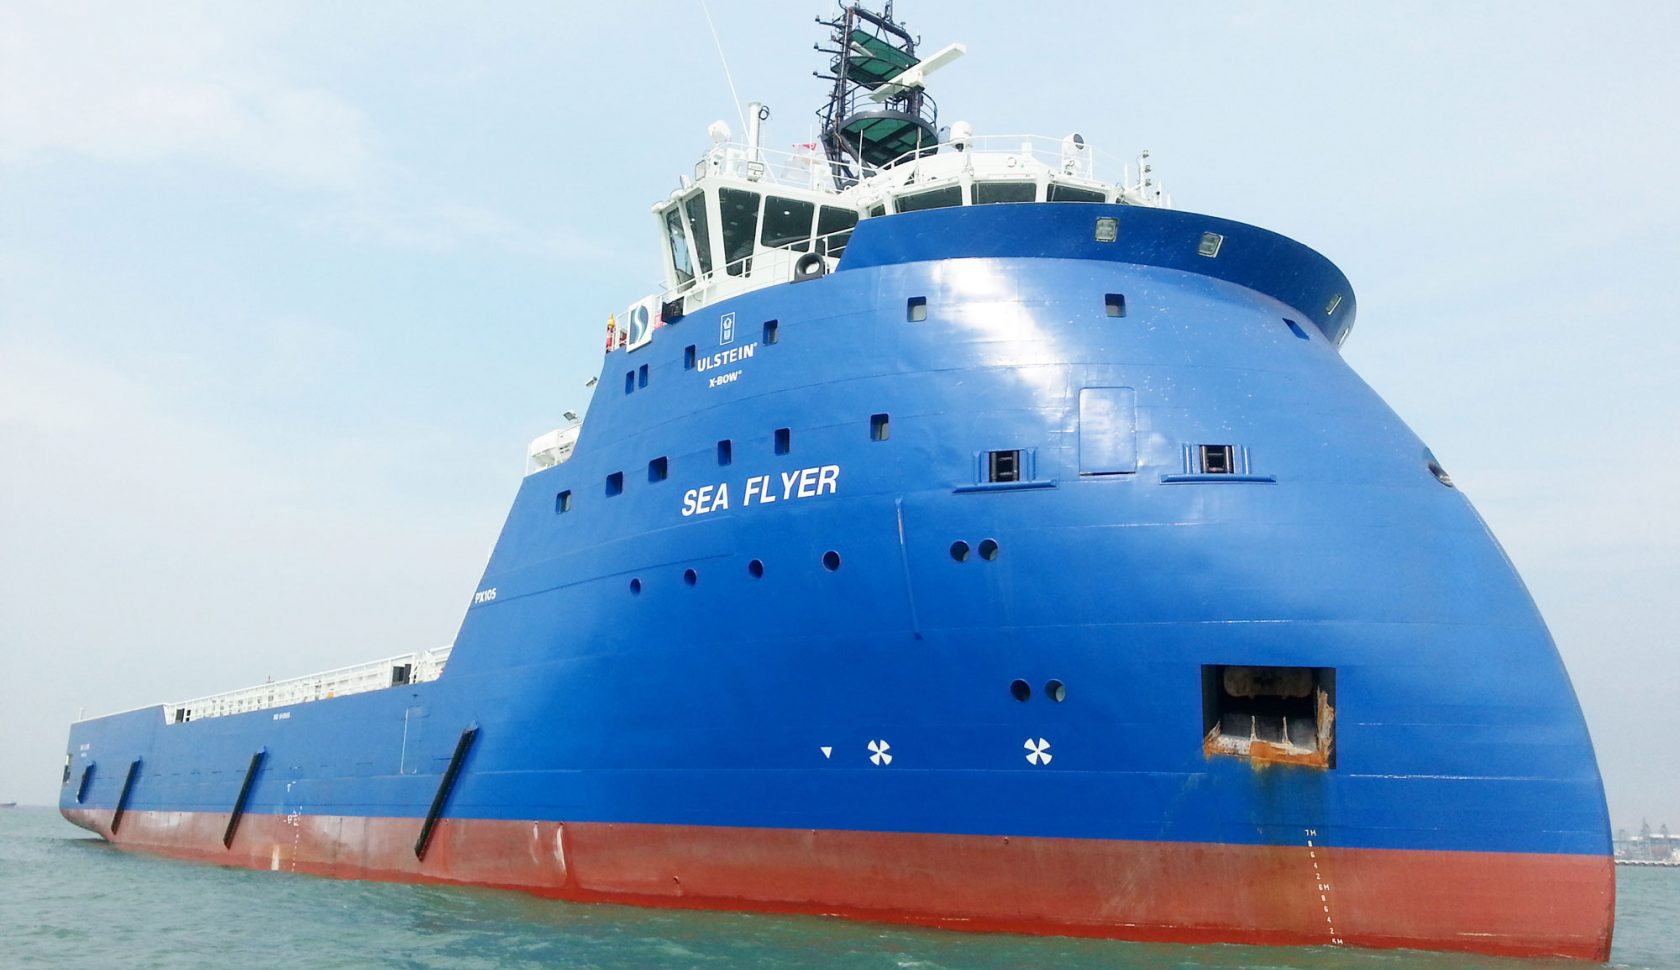 Solstad Offshore signs long-term contract for PSV Sea Flyer